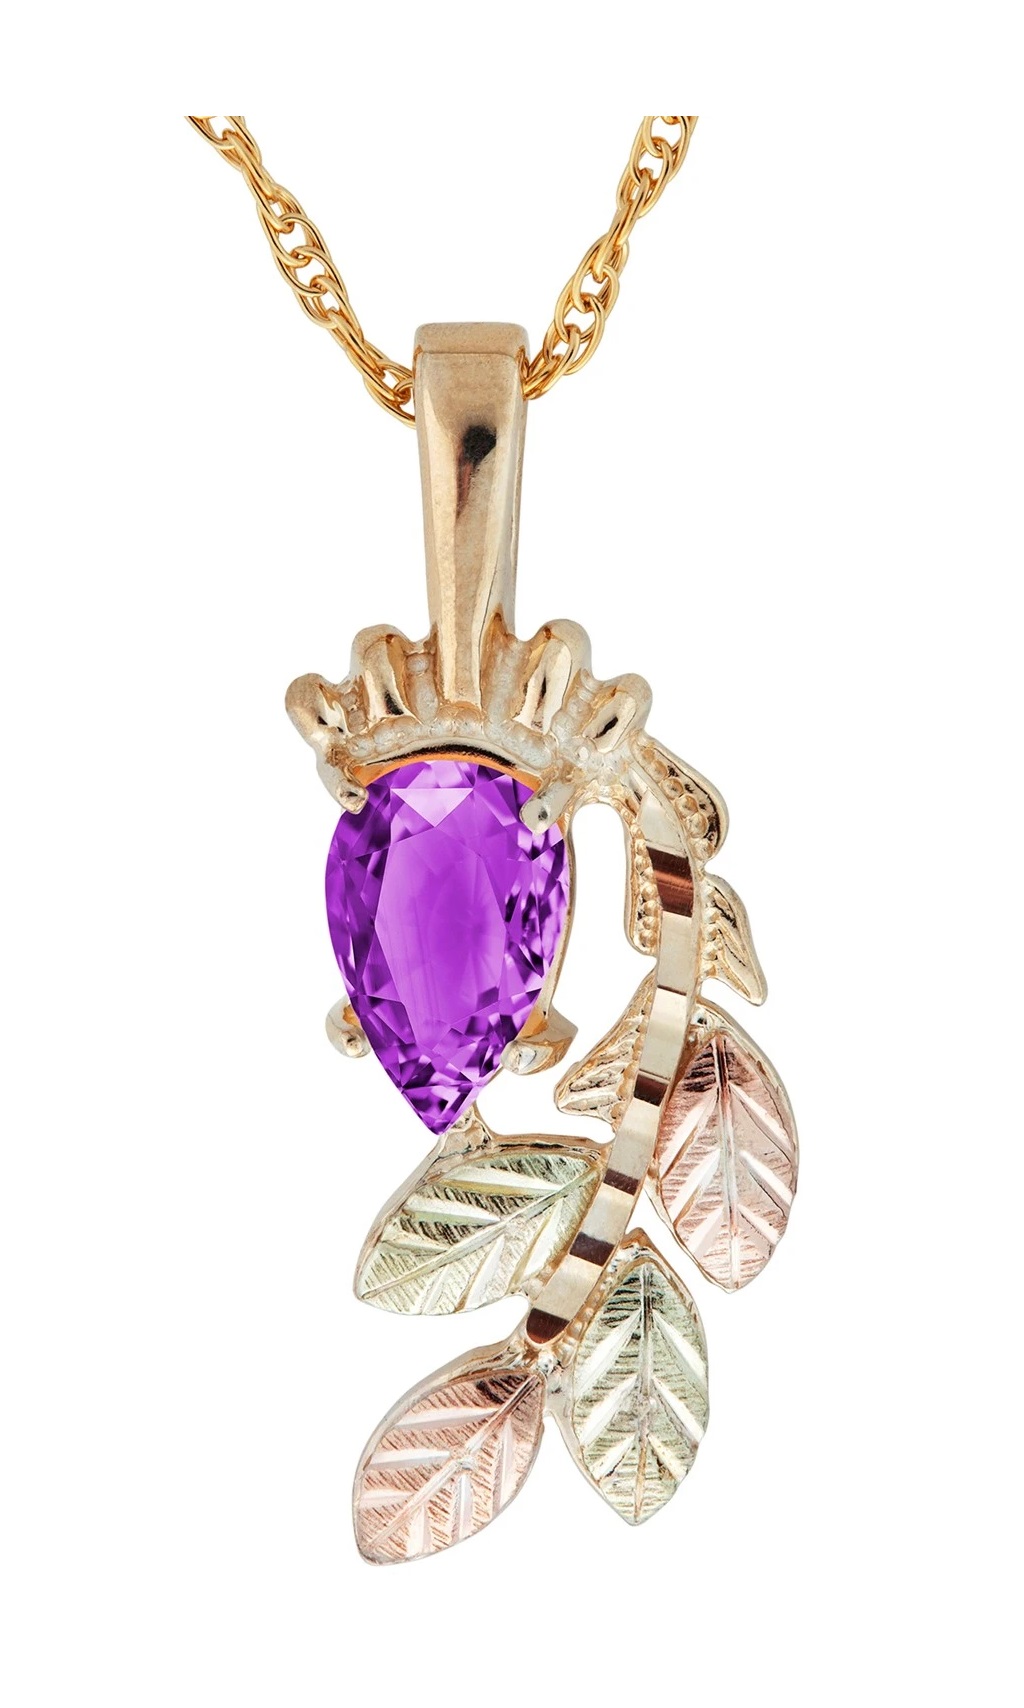 10K Yellow Gold Amethyst Pear Shaped Pendant Necklace